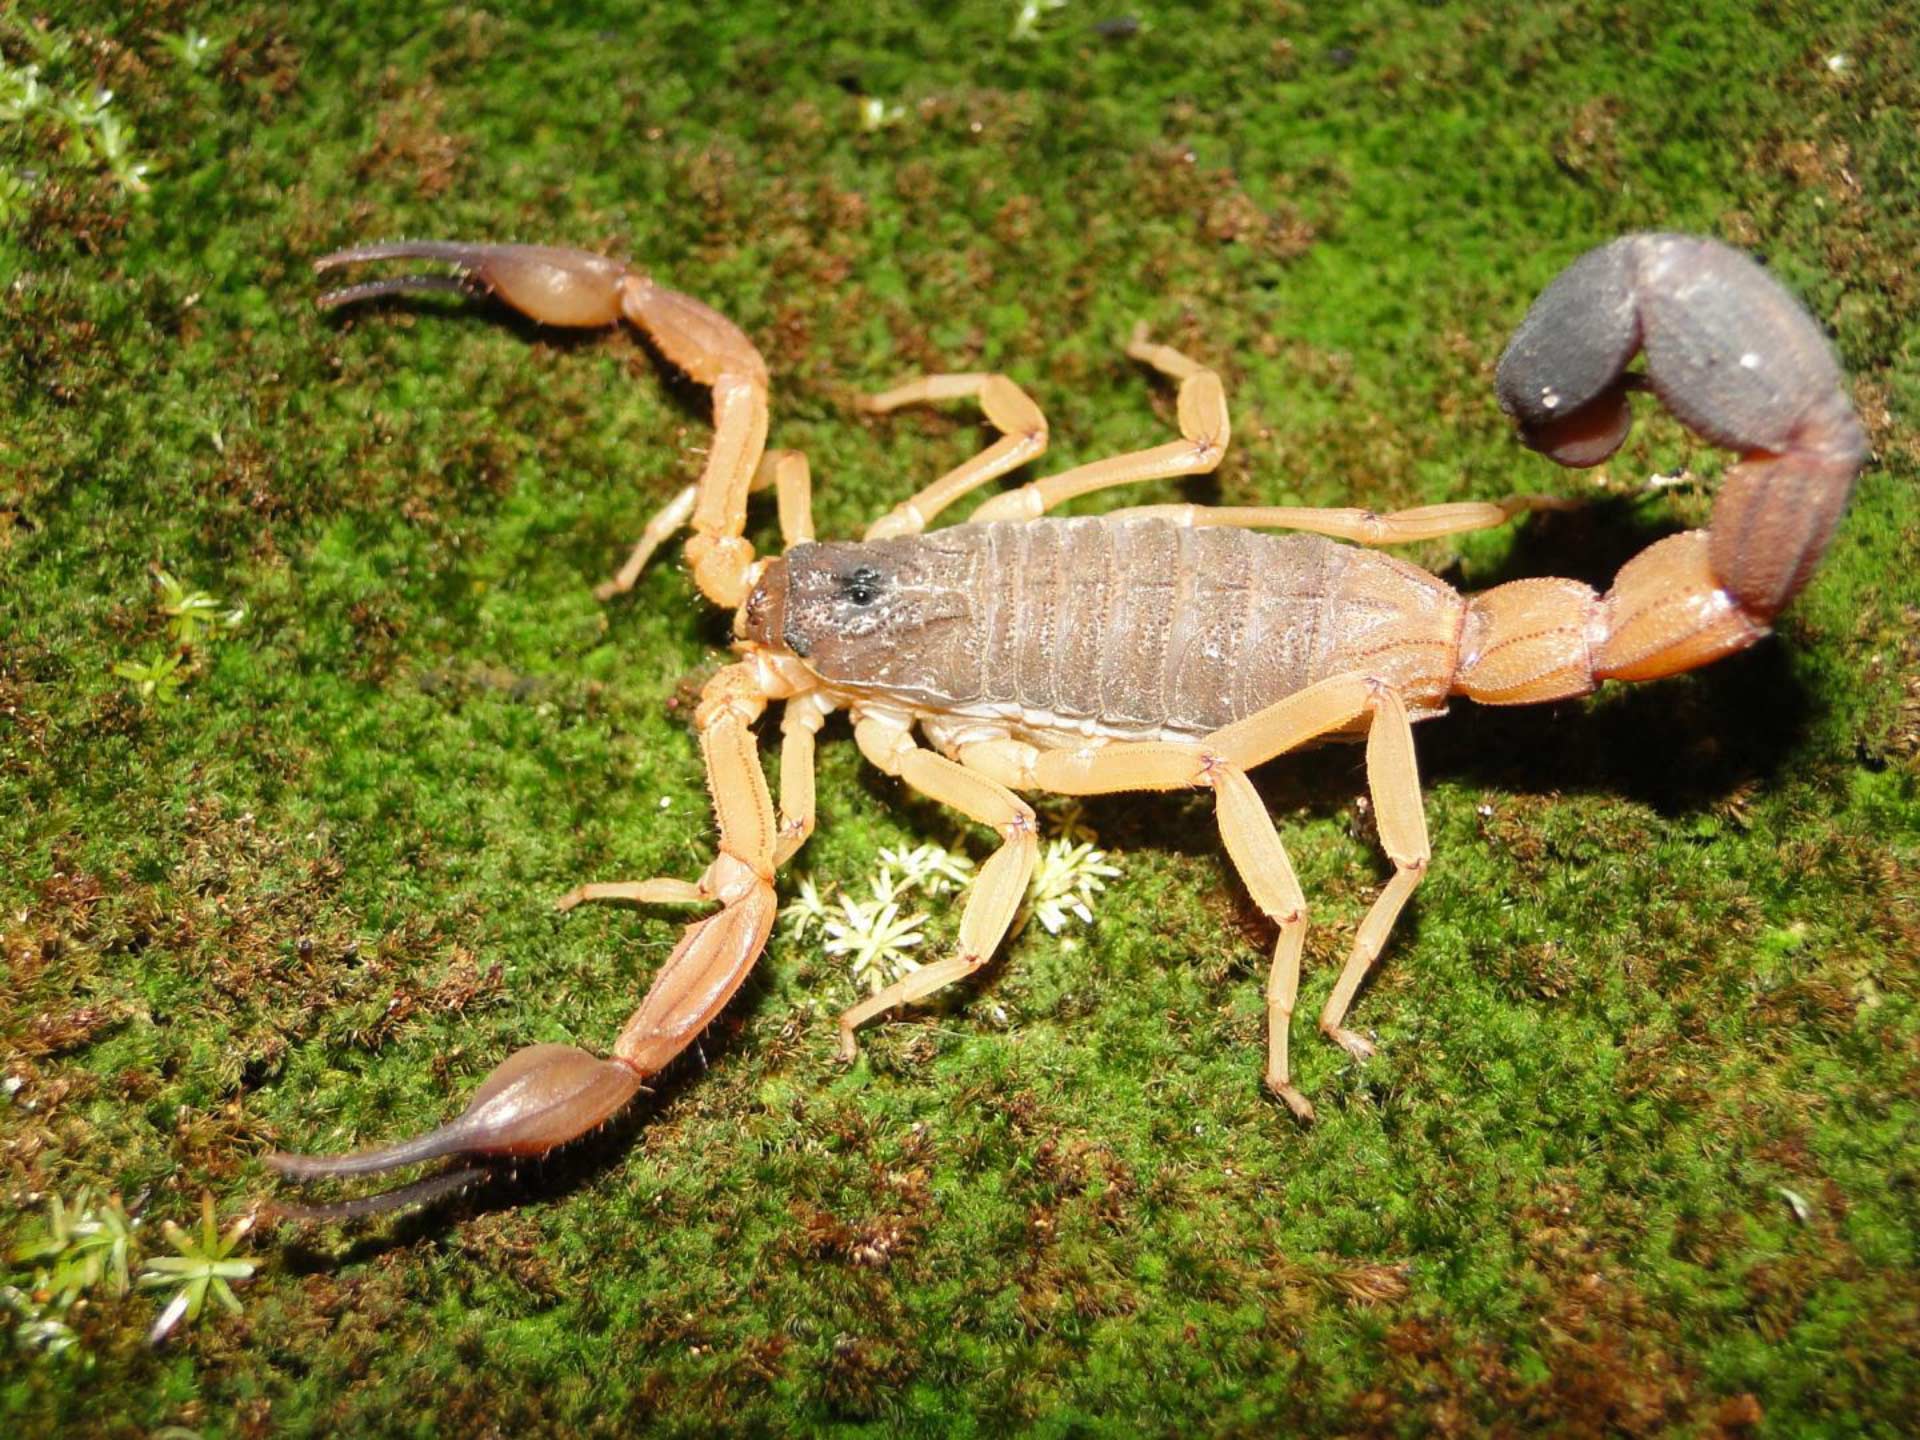 Arachnologists Discover Three New Species of Club-Tailed Scorpions ...